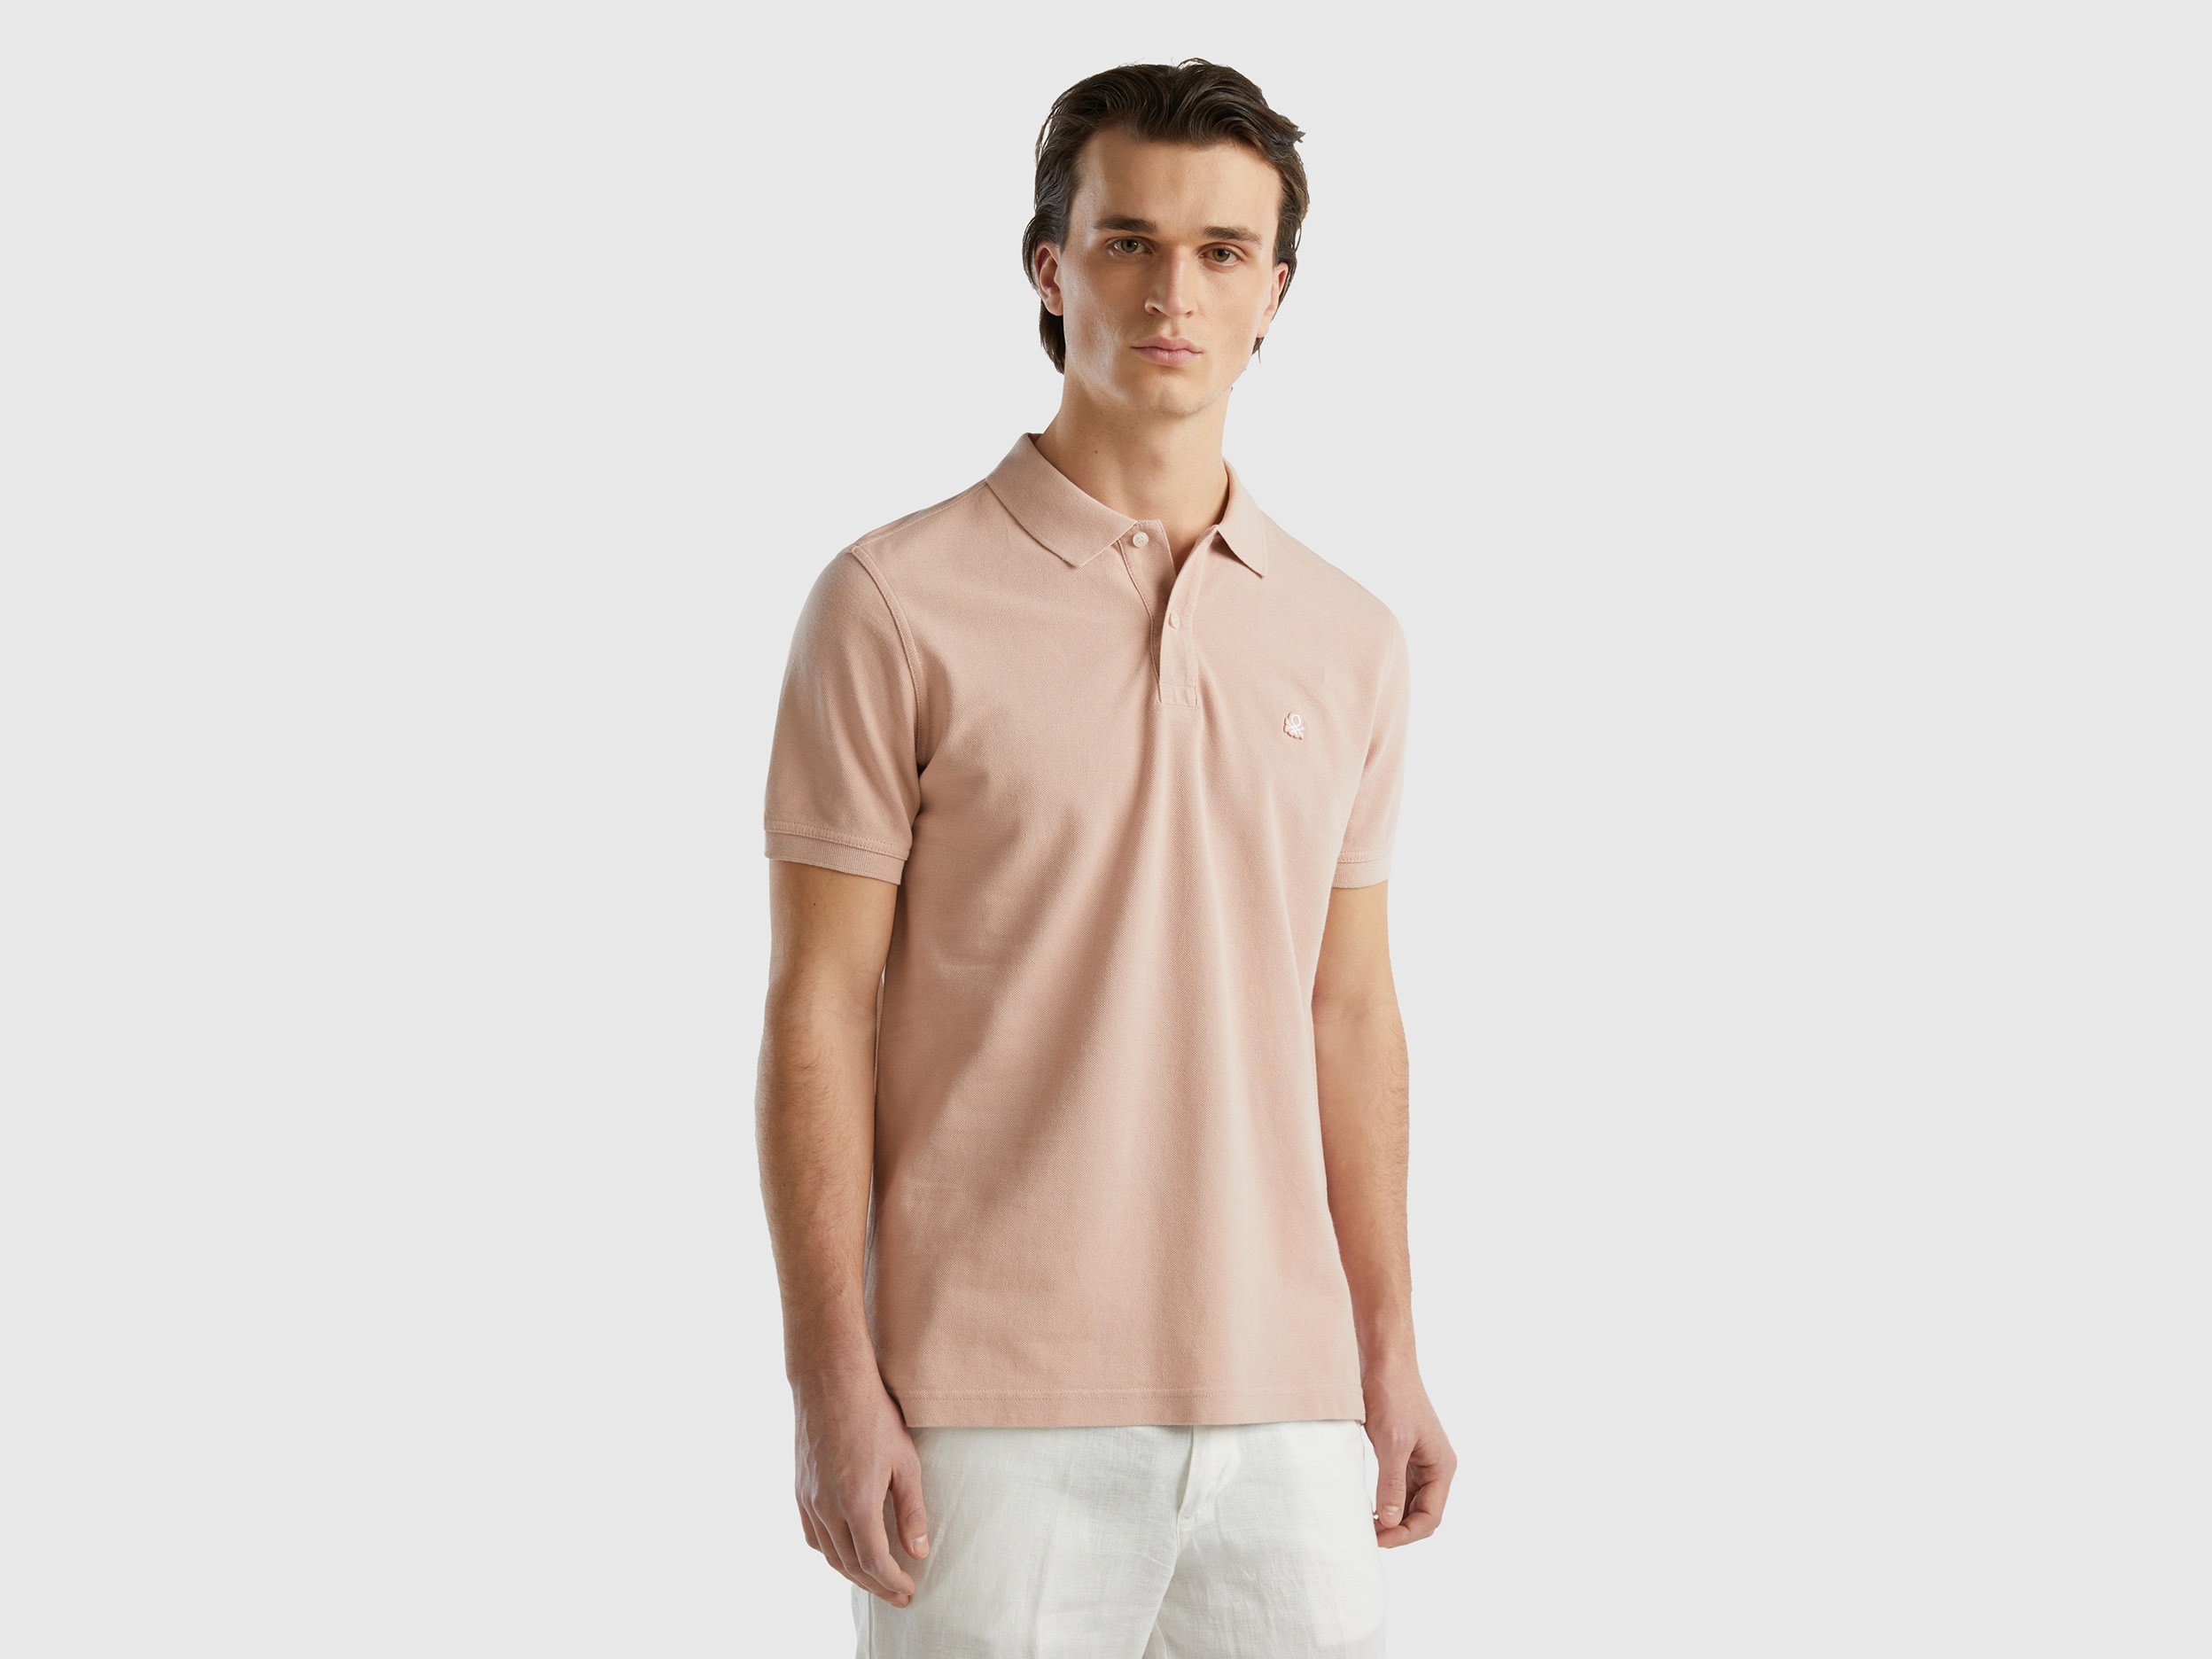 Image of Benetton, Soft Pink Regular Fit Polo, size XS, Soft Pink, Men